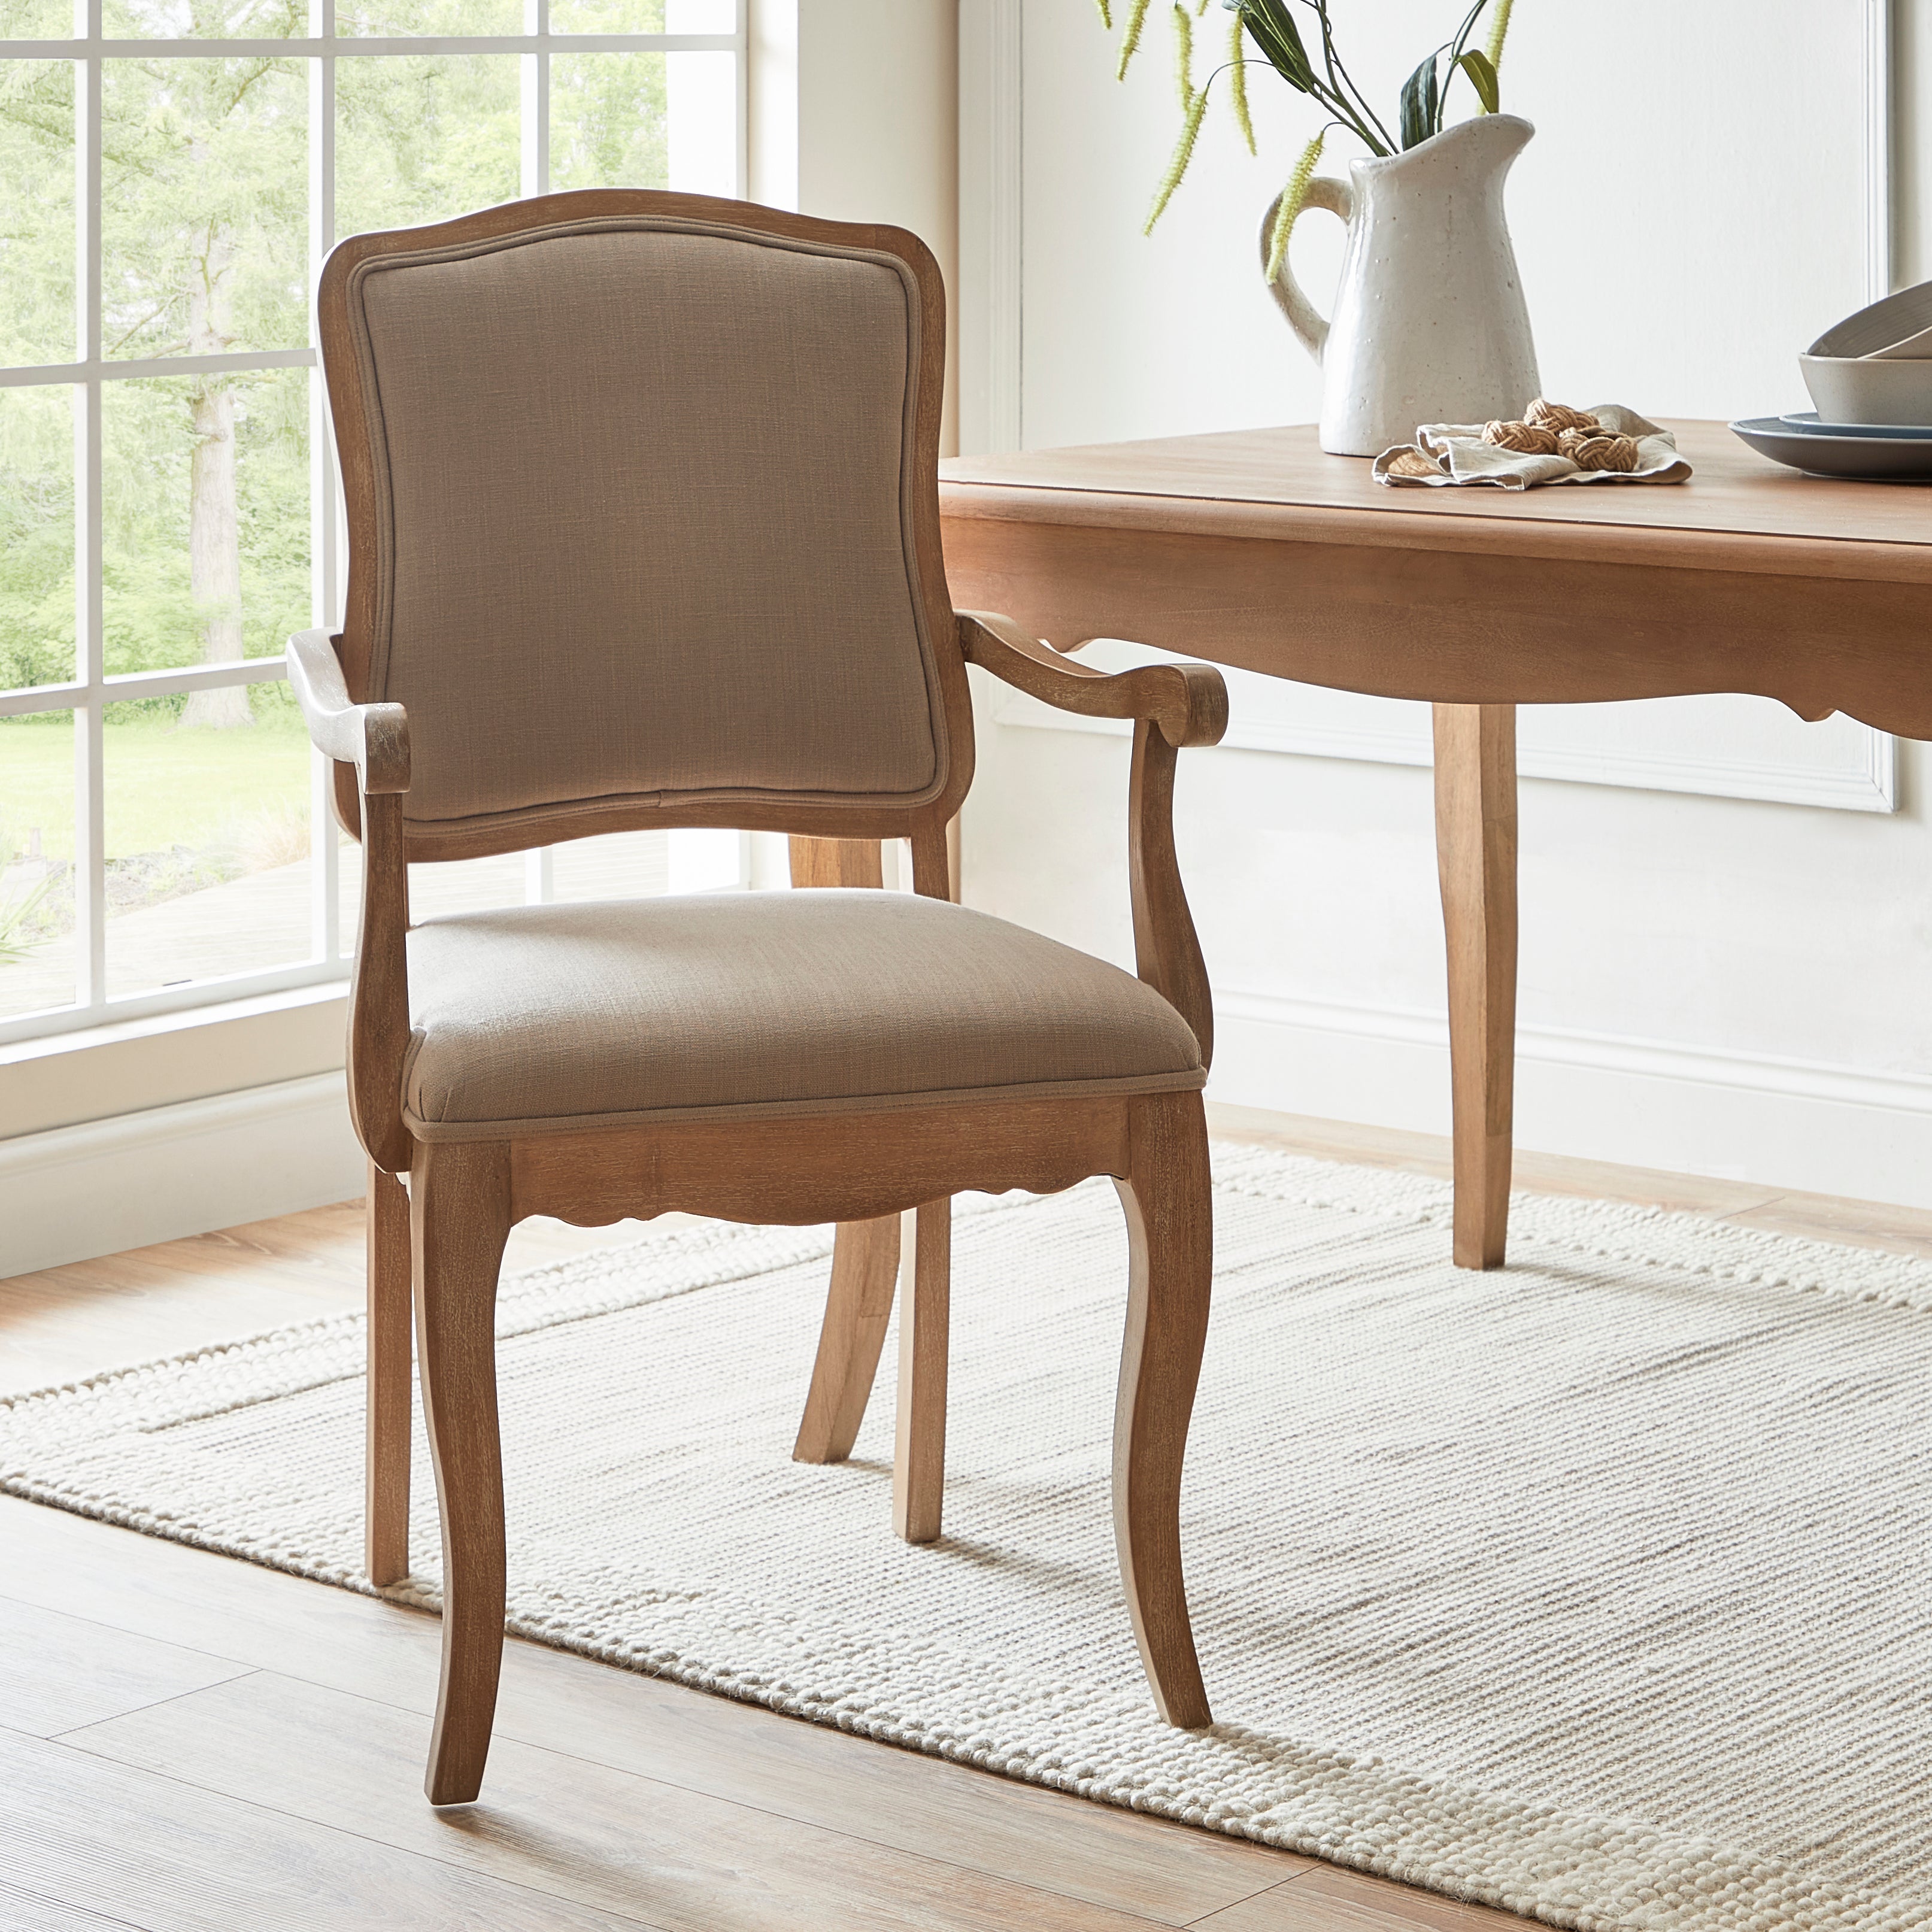 Giselle Carver Dining Chair Mango Wood Natural